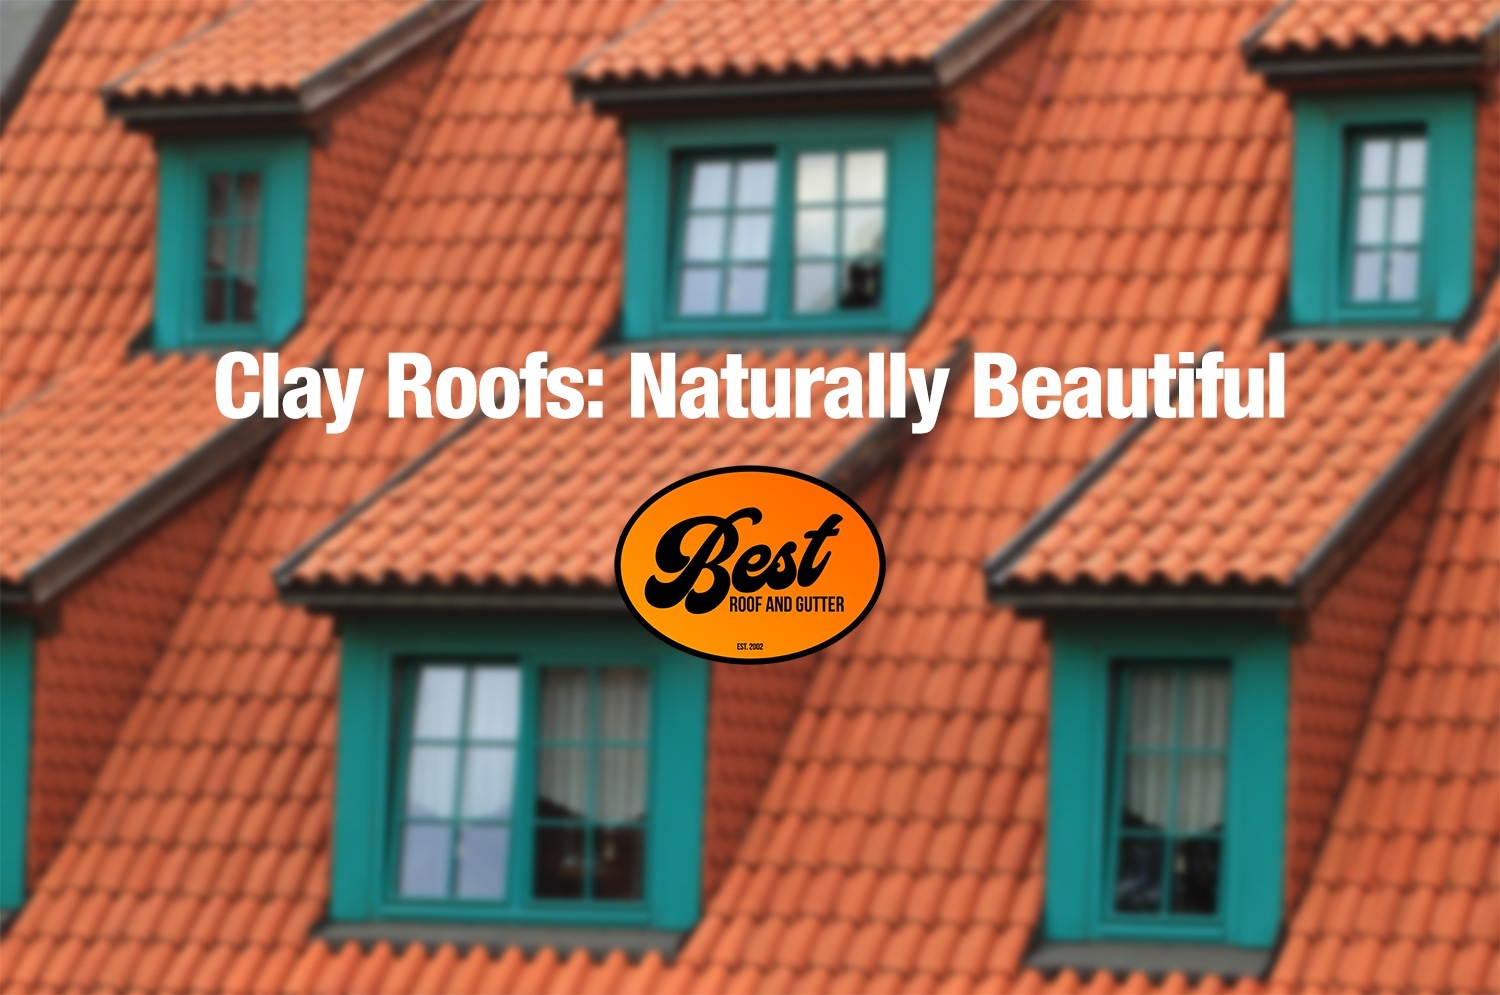 Clay Roofs: Naturally Beautiful